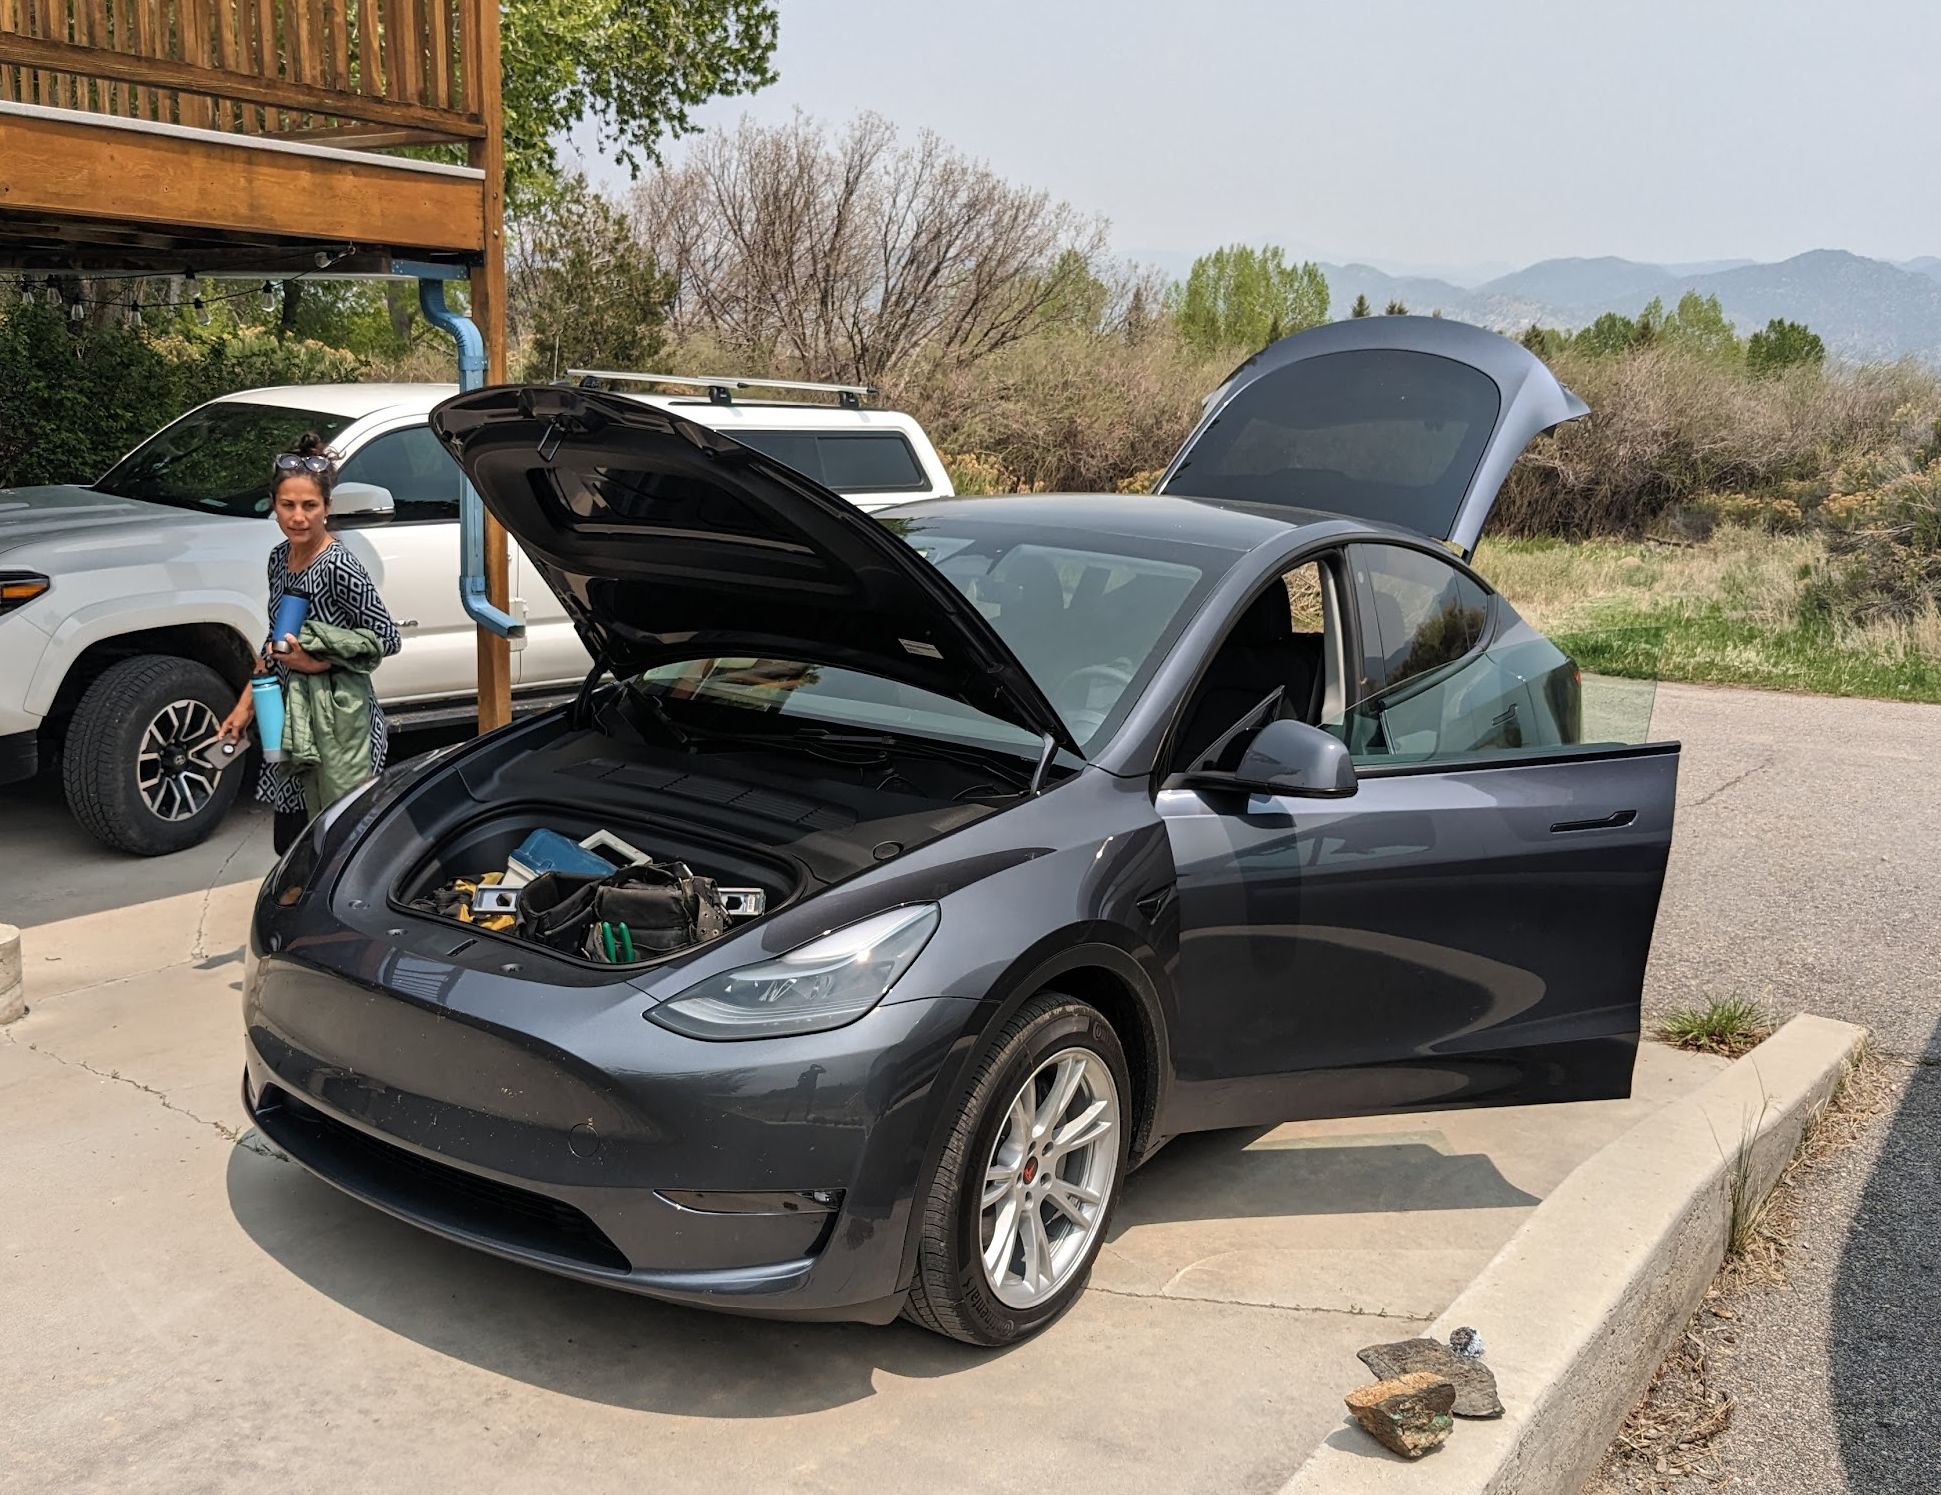 The Model Y Experiment